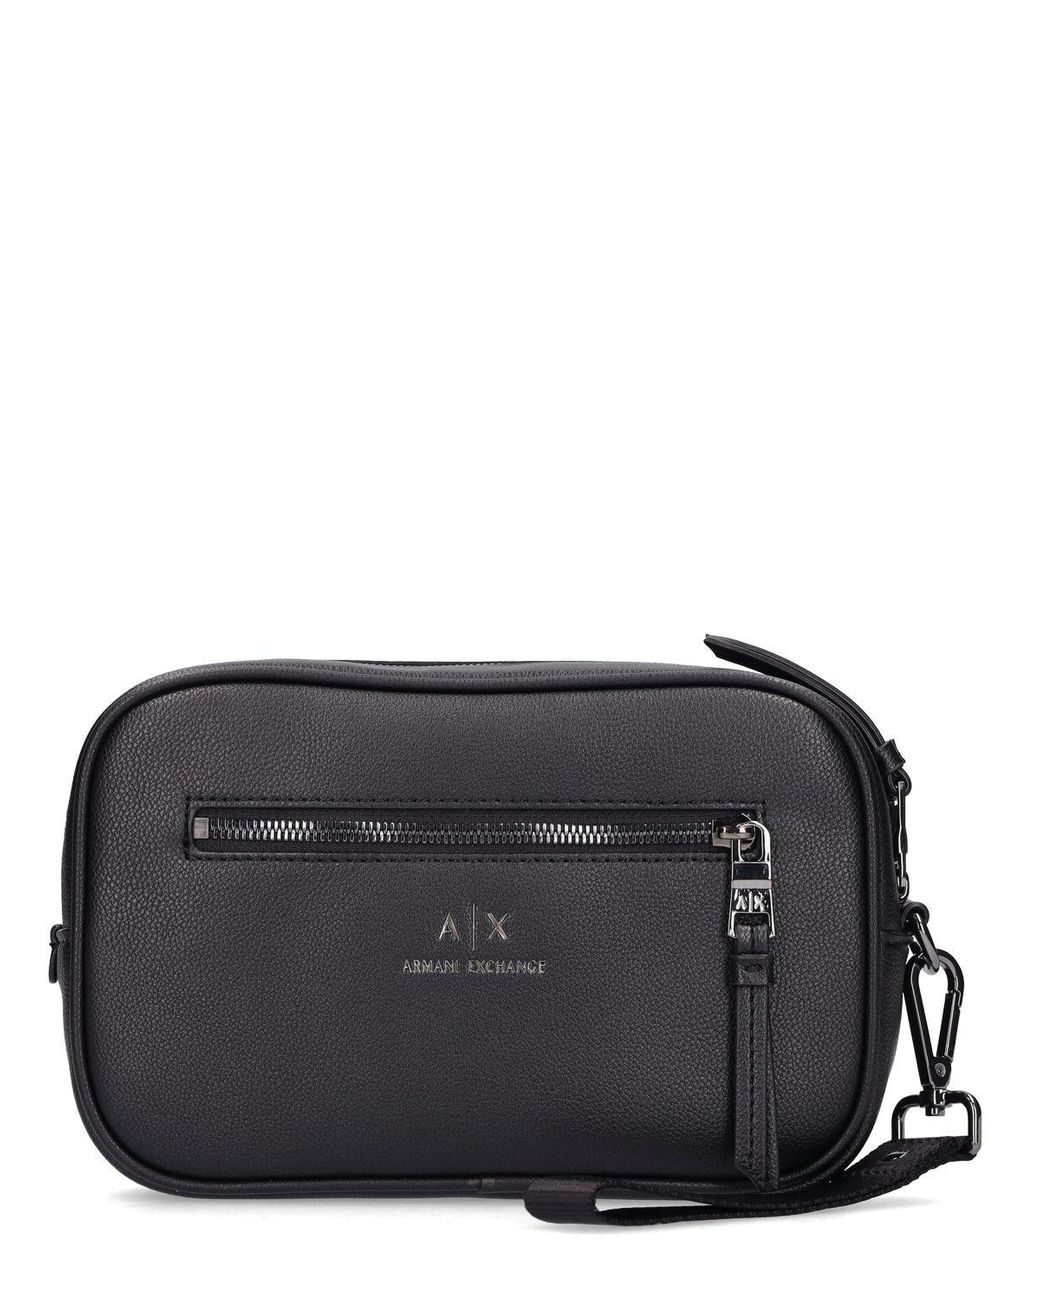 Faux leather central logo zipper backpack | ARMANI EXCHANGE Man